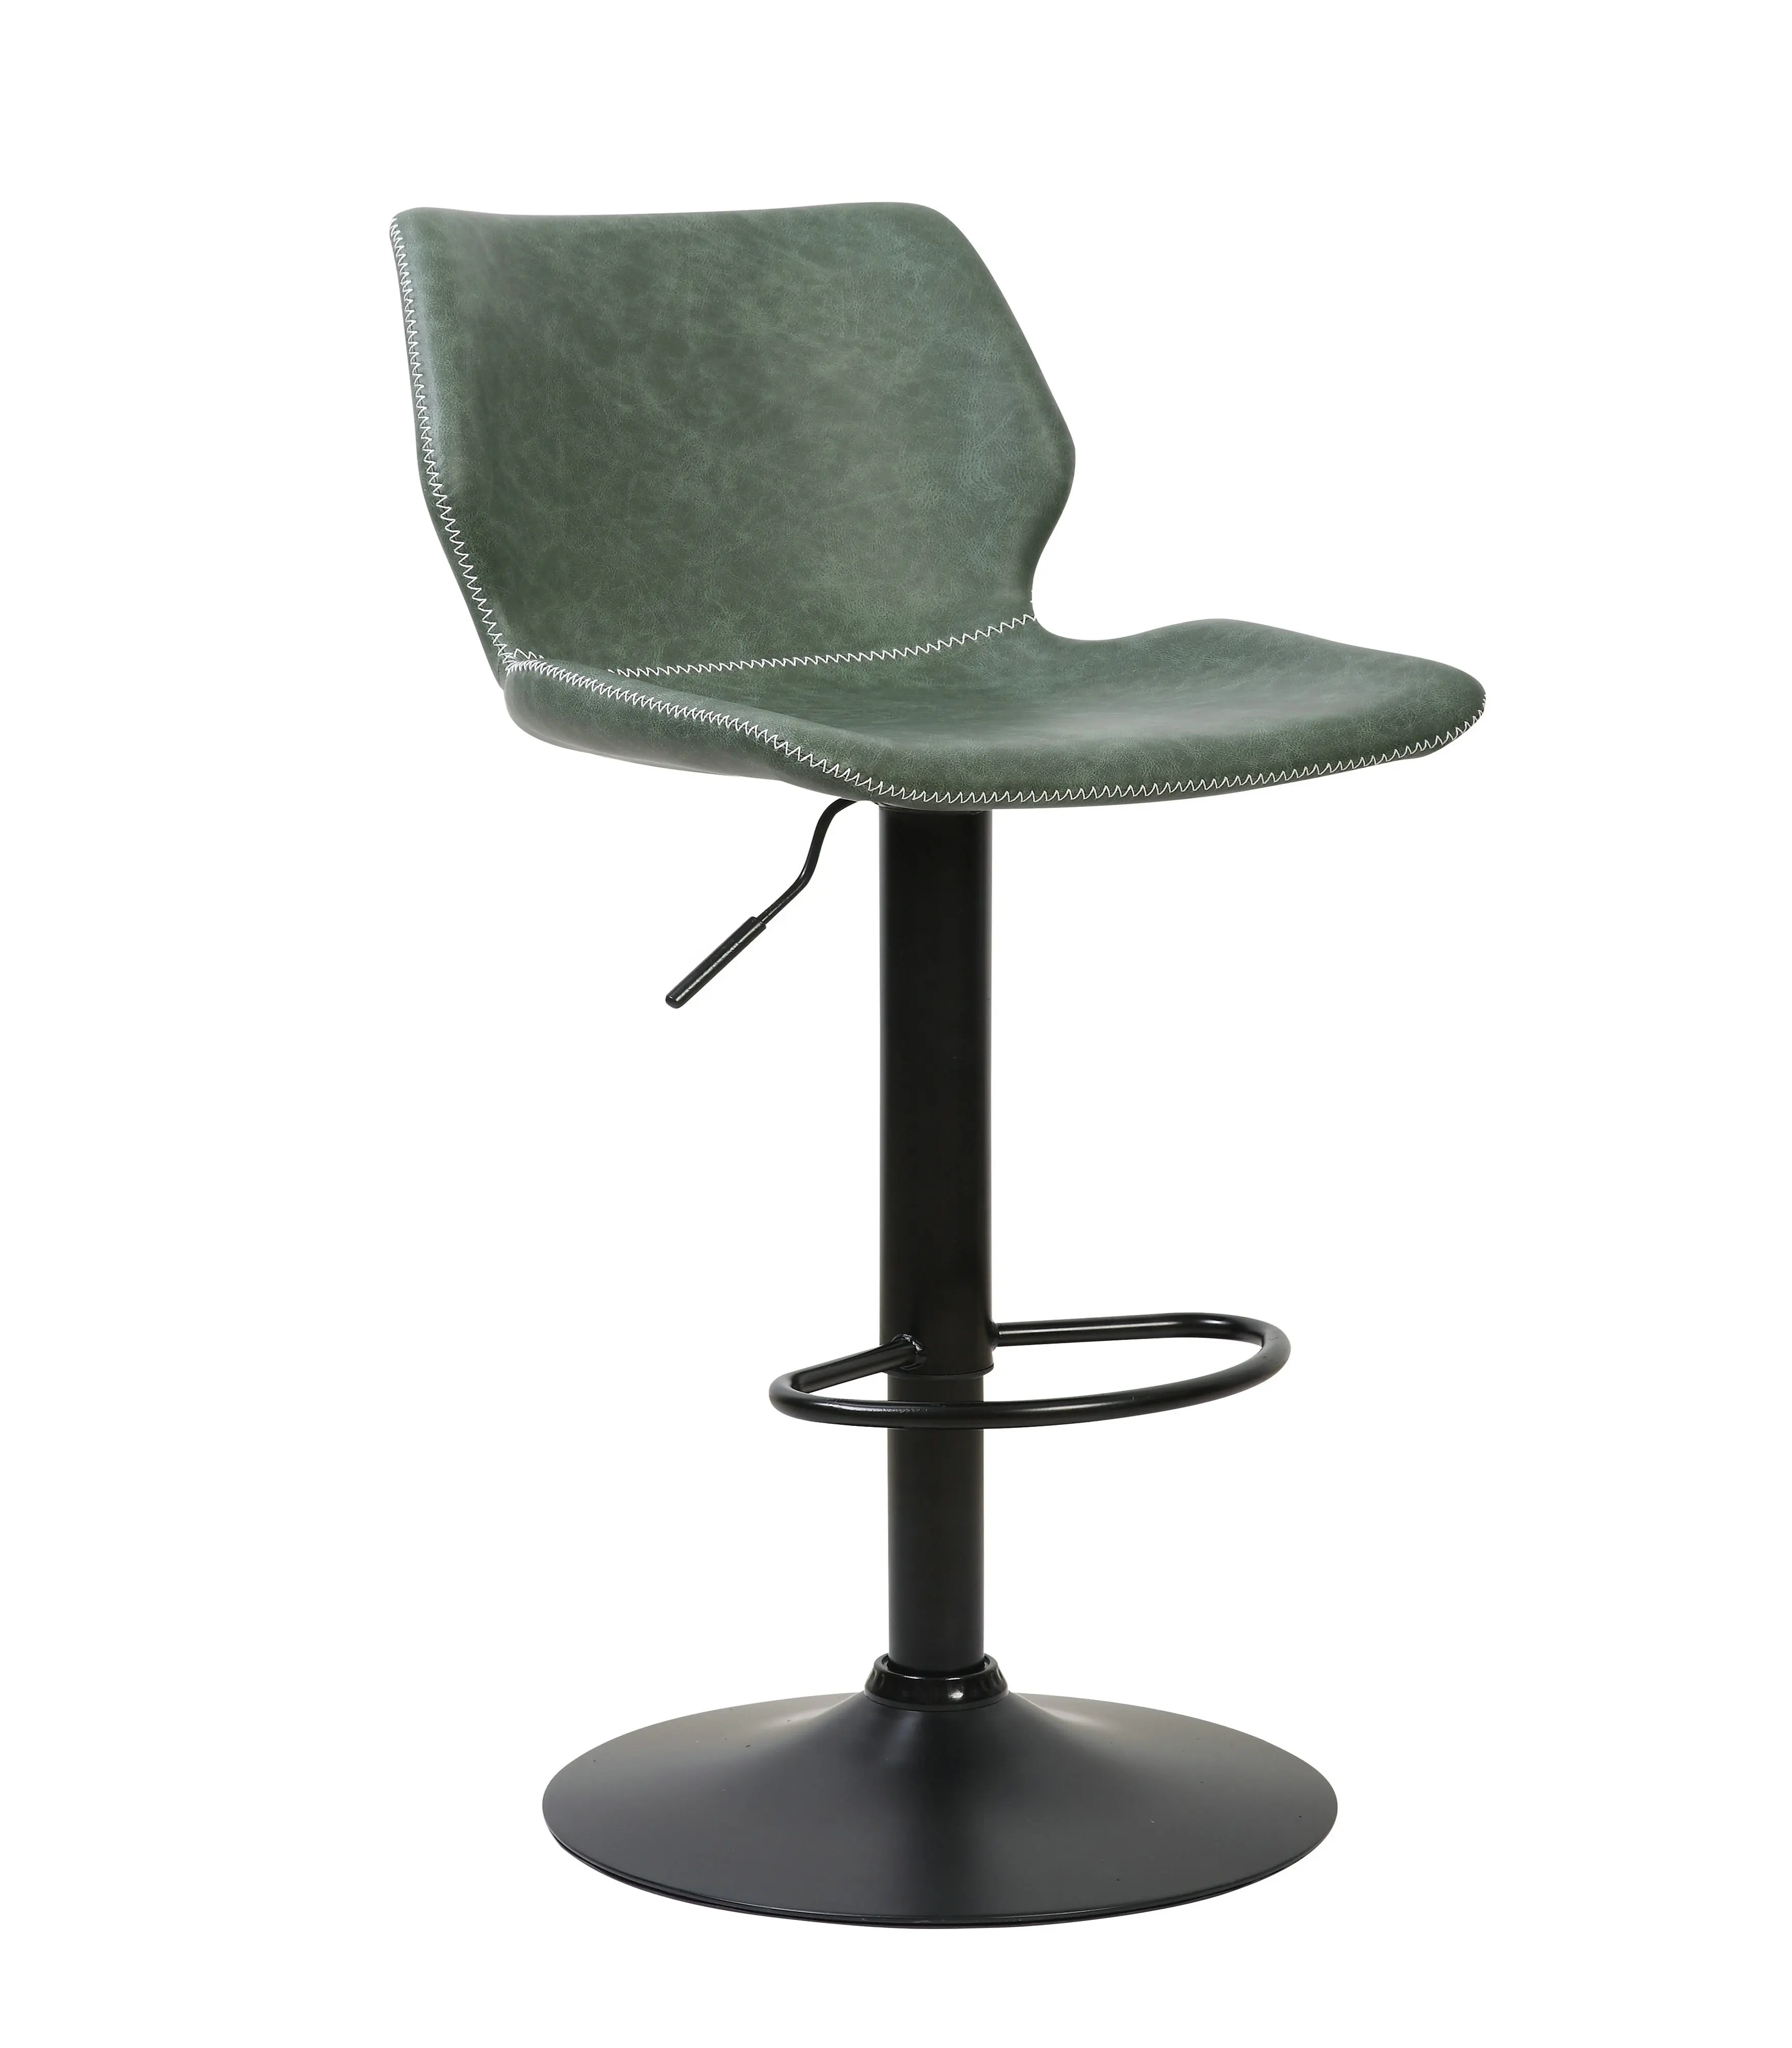 Adjustable Height Swivel Metal Frame Bar Stool With Antique Pu Cushion Seat